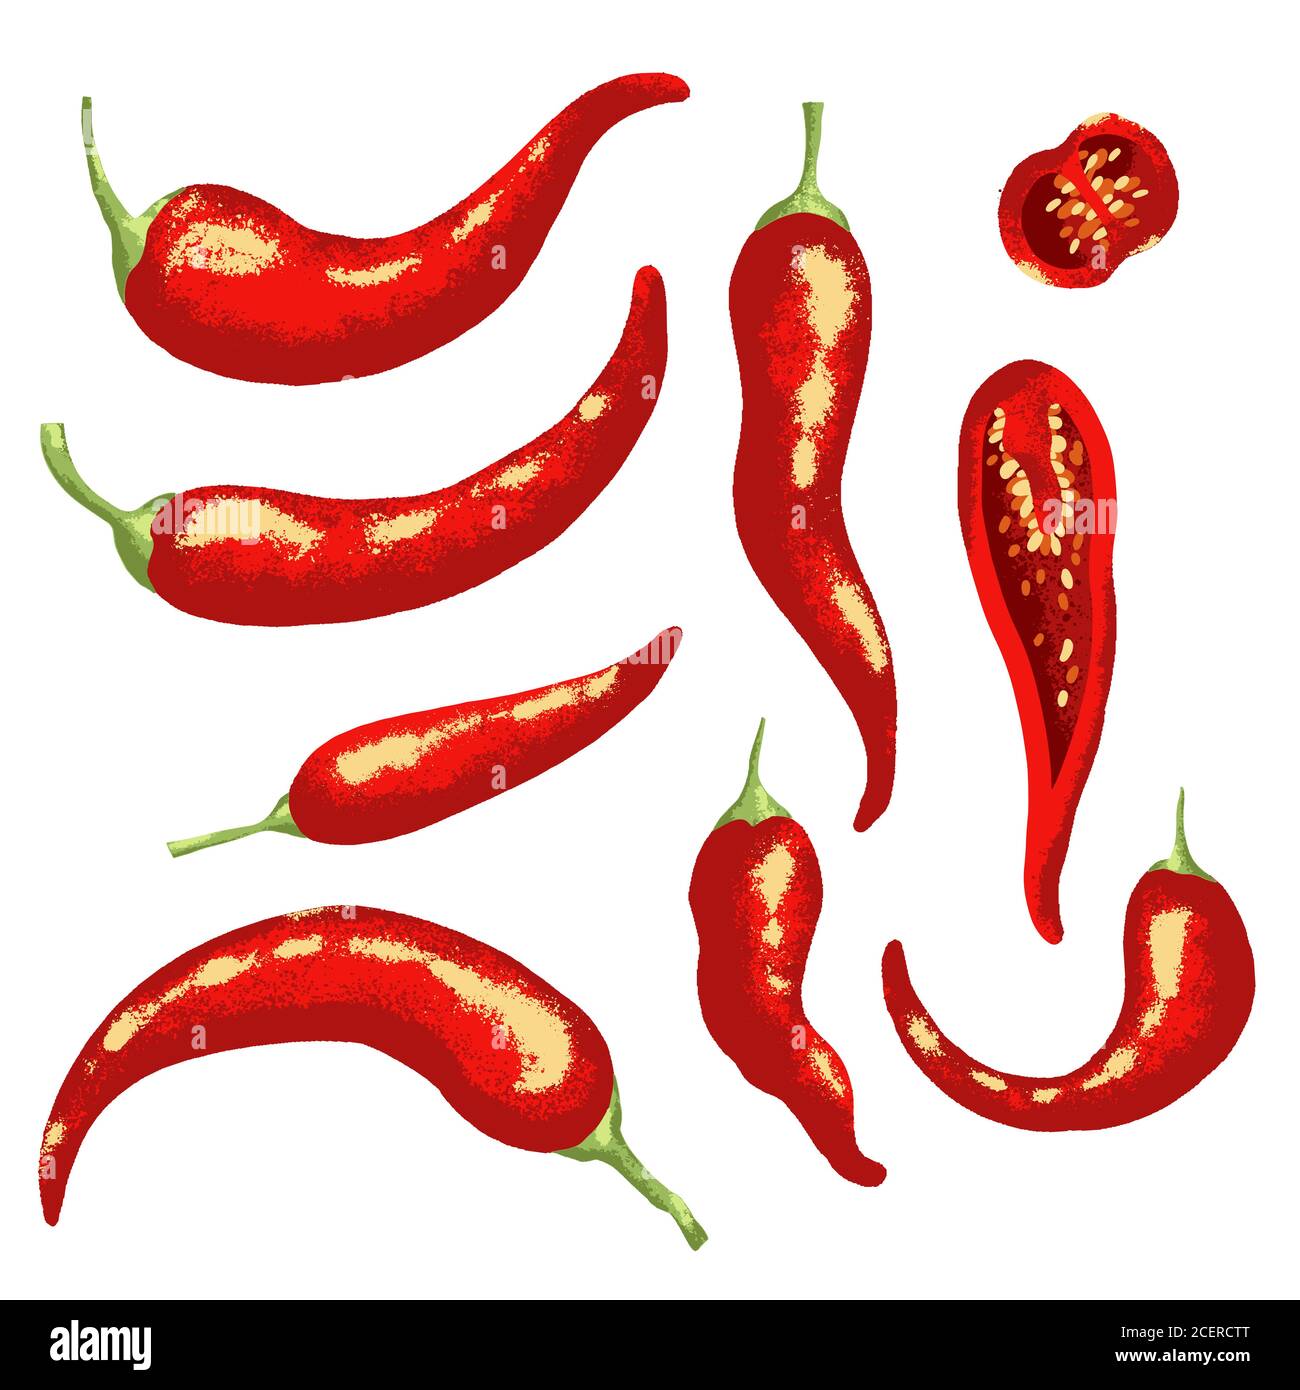 Red hot chili pepper on white background. Isolated vector illustration. Stock Vector